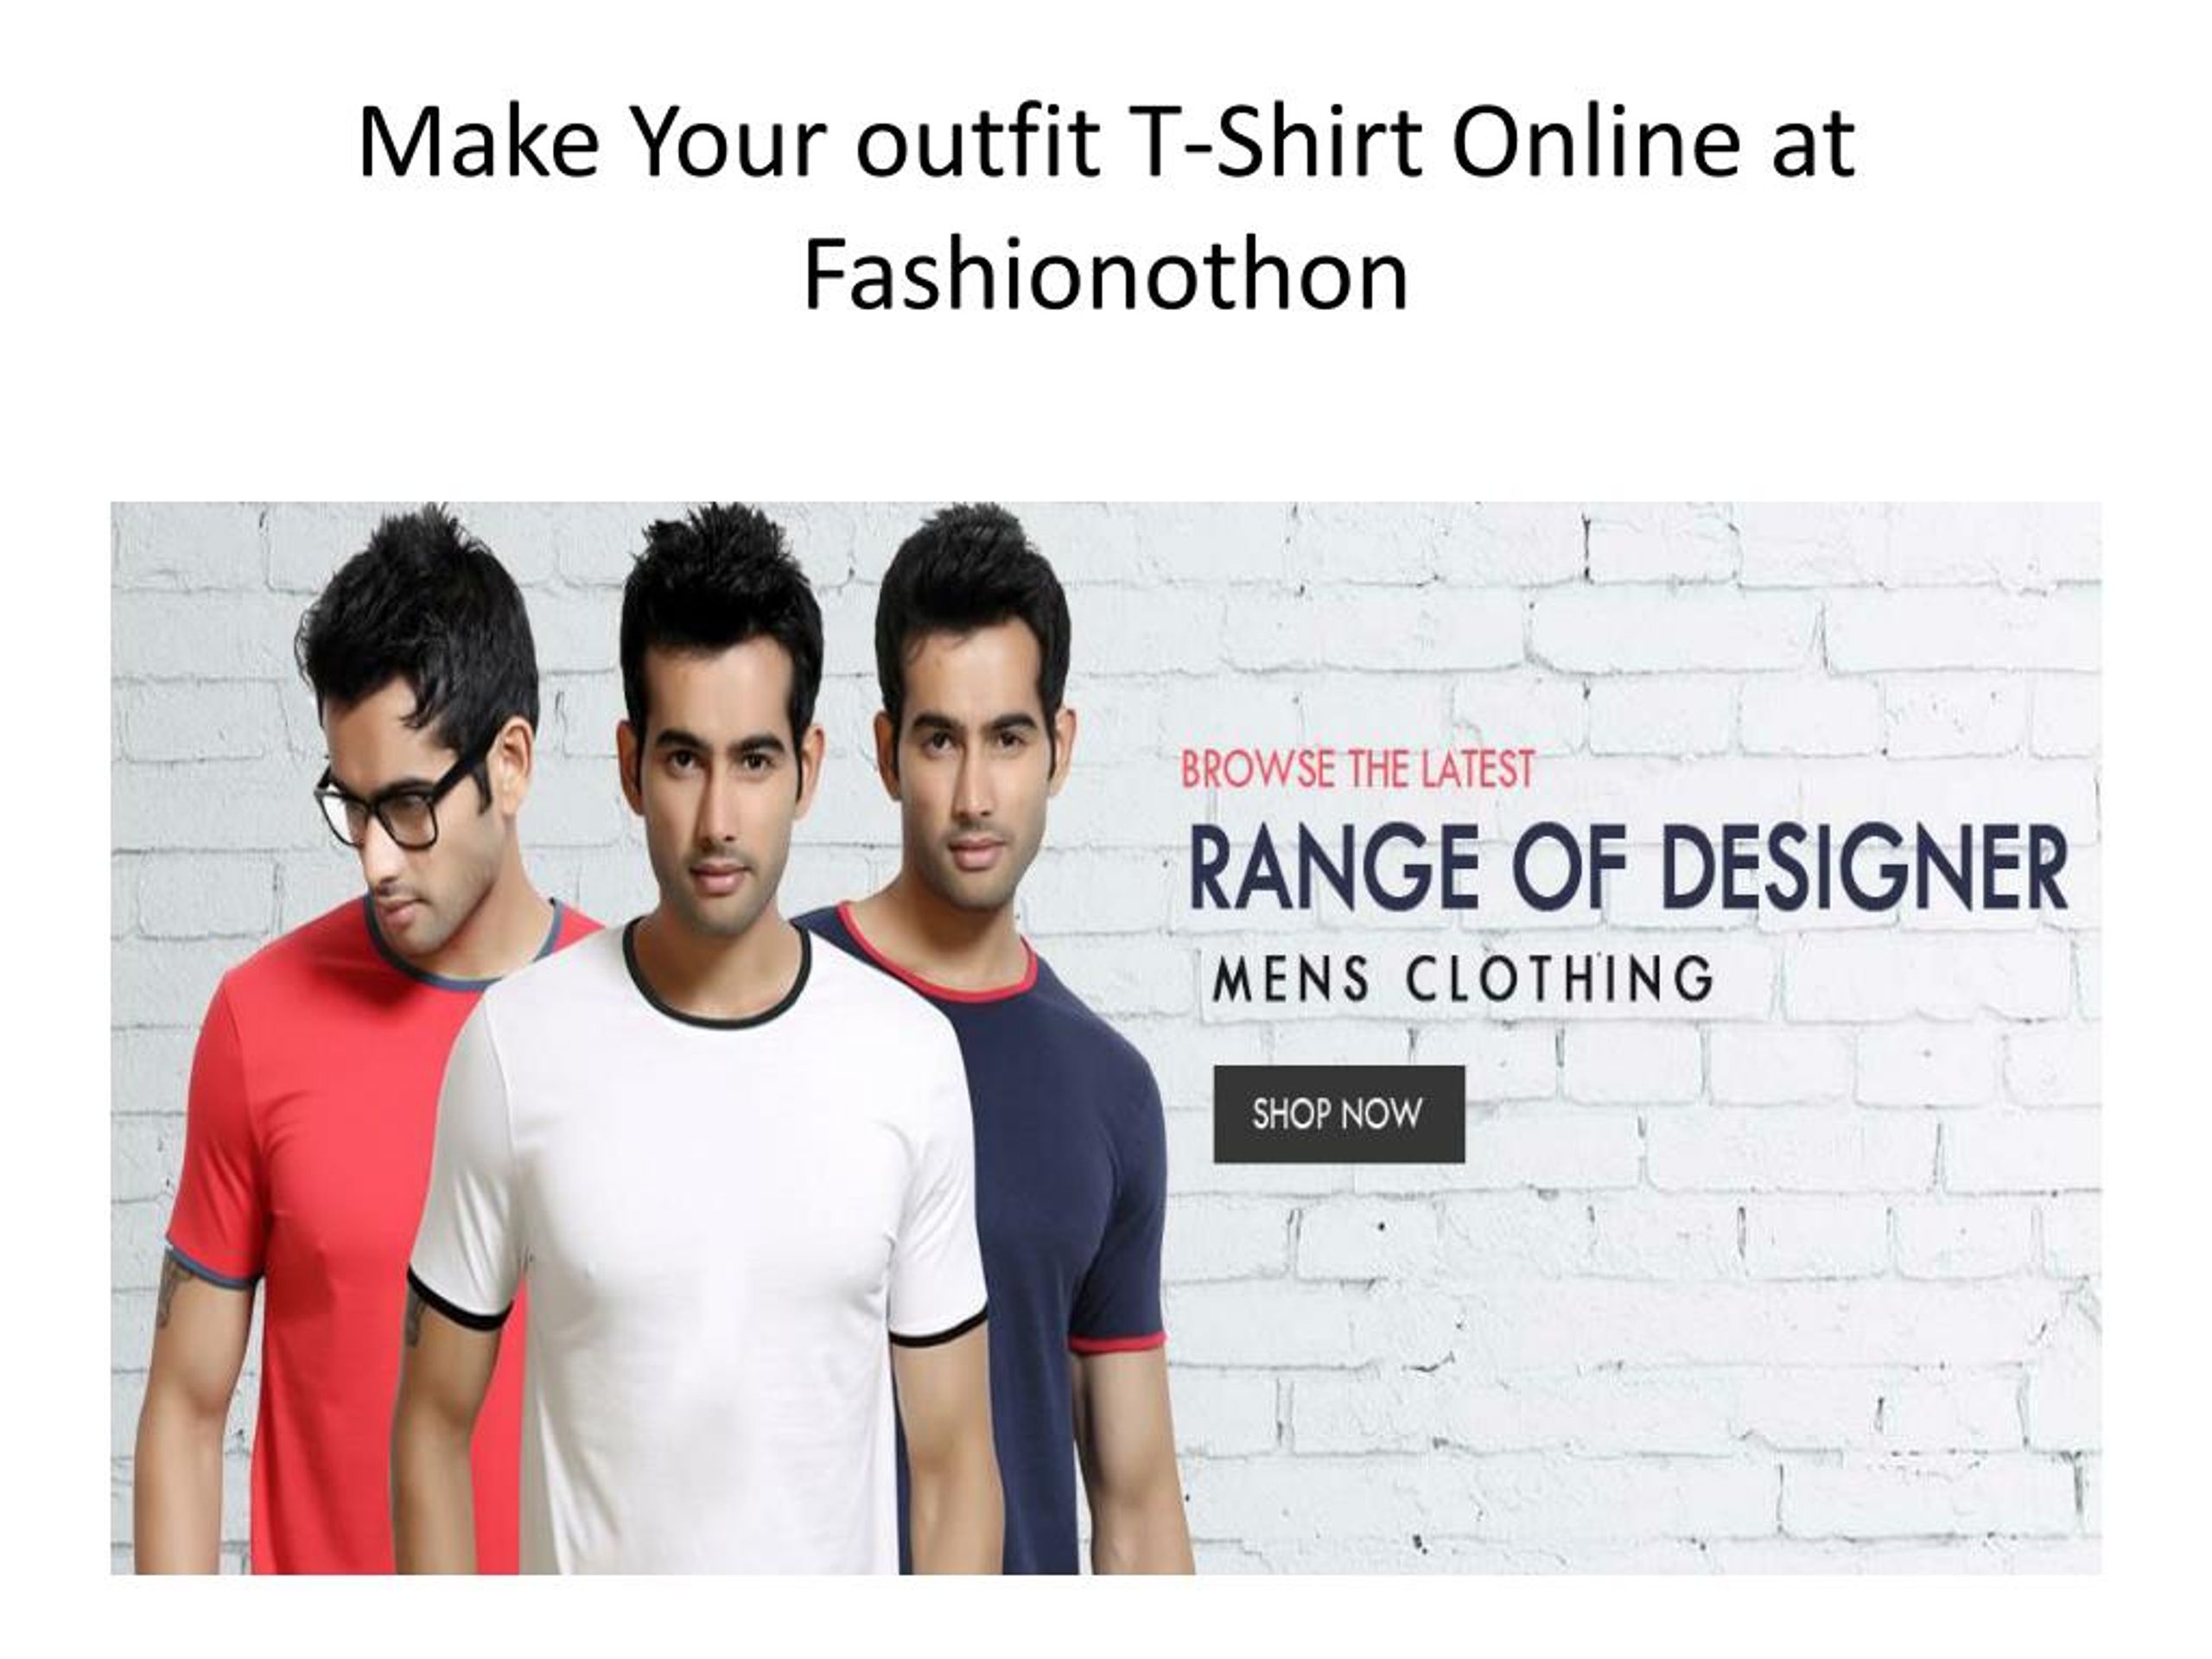 PPT - Make Your outfit T-Shirt Online at Fashionothon PowerPoint ...